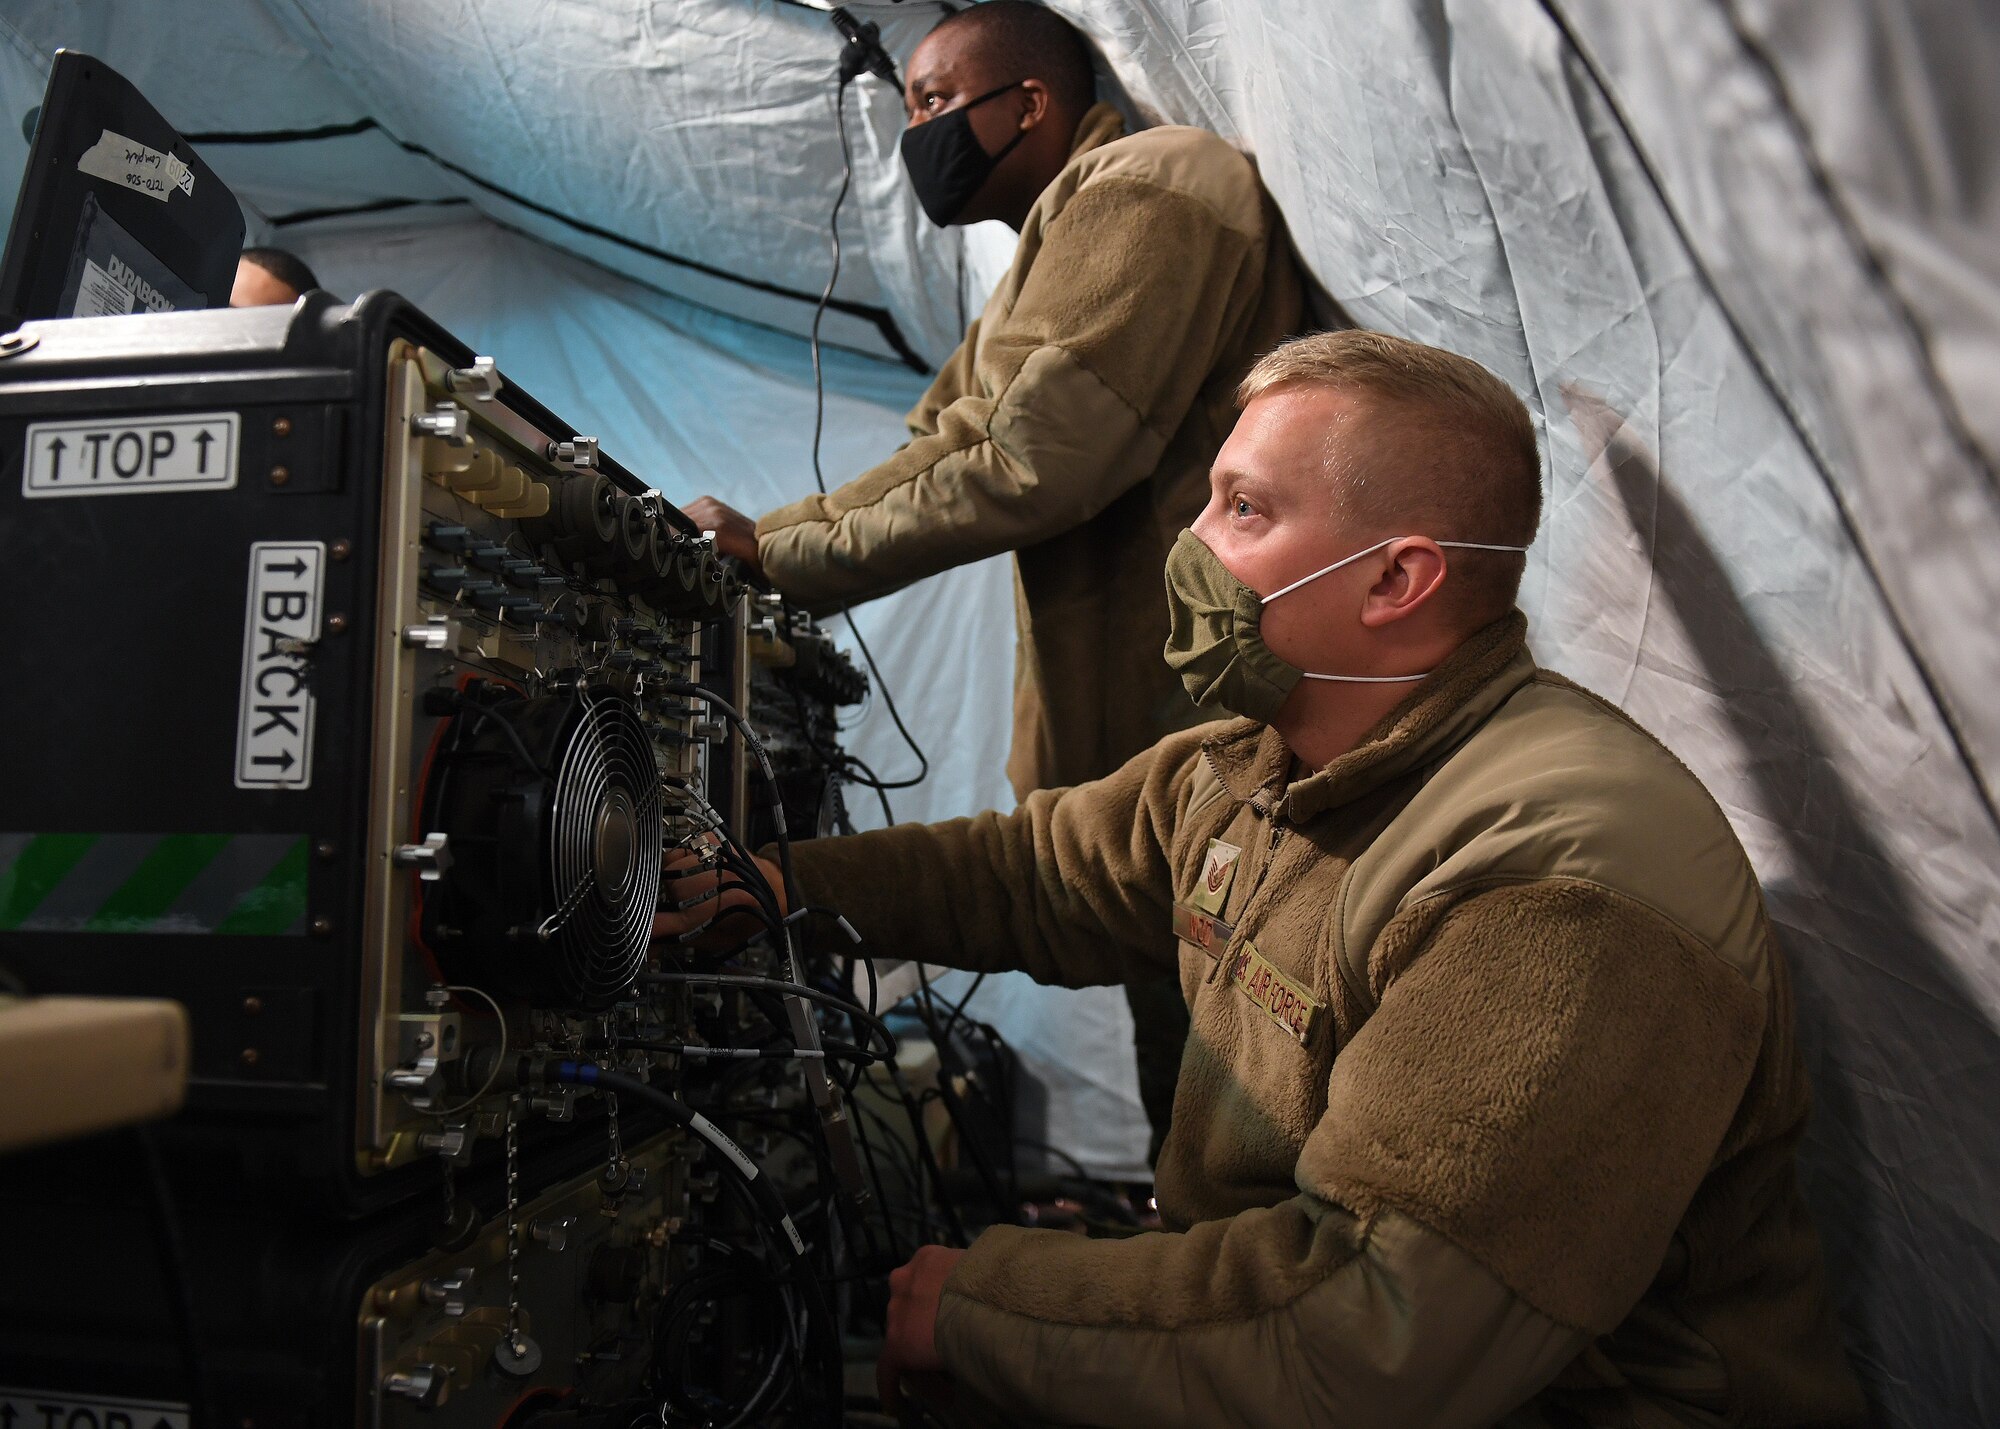 Tech. Sgt. Daniel Wood, 379th Space Range Squadron, checks physical connections to the modem on the Ground Multiband Terminal case while Master Sgt. Matthew Cleveland, 379th SRS, verifies the fix action prior to operations during the 379th SRS Field Training Exercise Sept. 10-13, 2020, at the United States Air Force Academy's Field Engineering Readiness Laboratory, Colorado. (U.S. Air Force photo by Dennis Rogers)